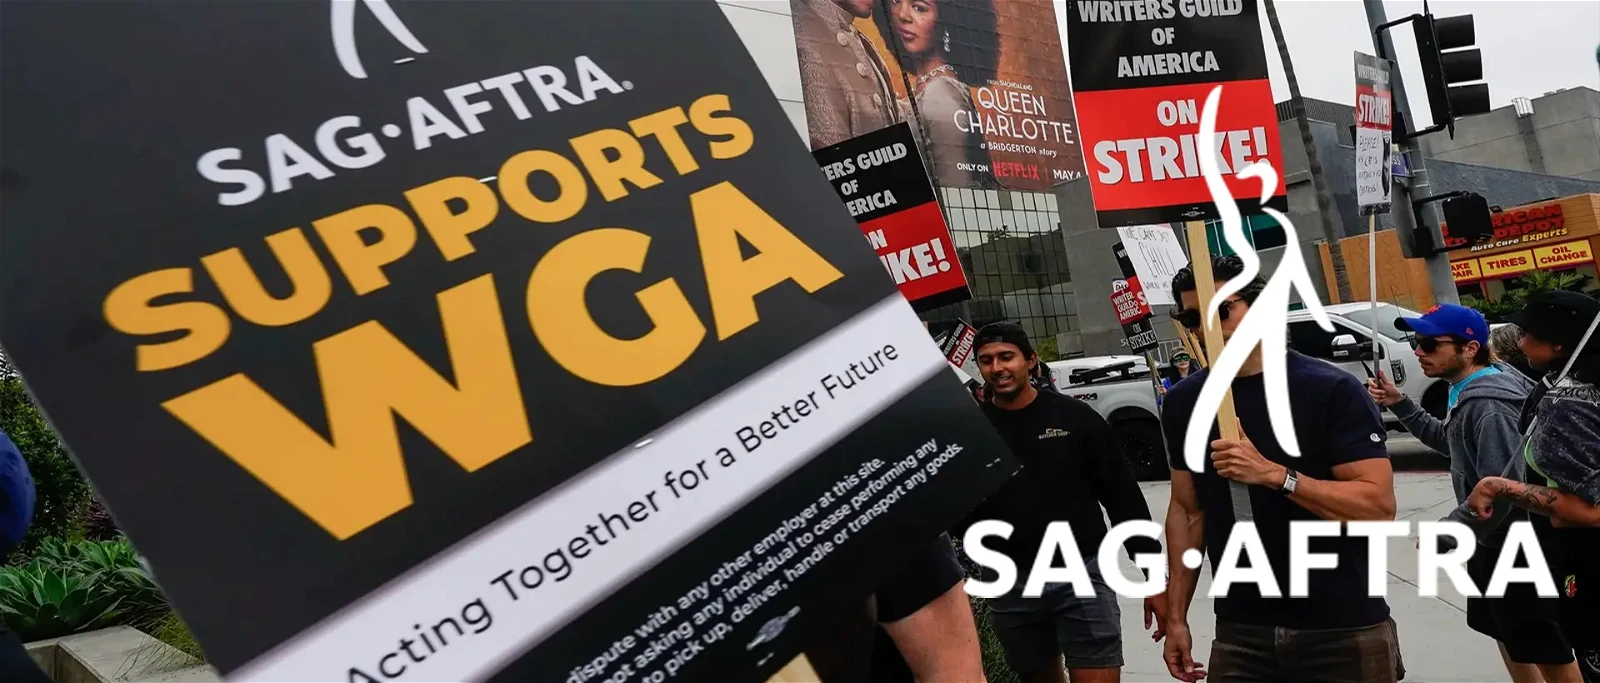 SAG-AFTRA has been on strike since the past two weeks